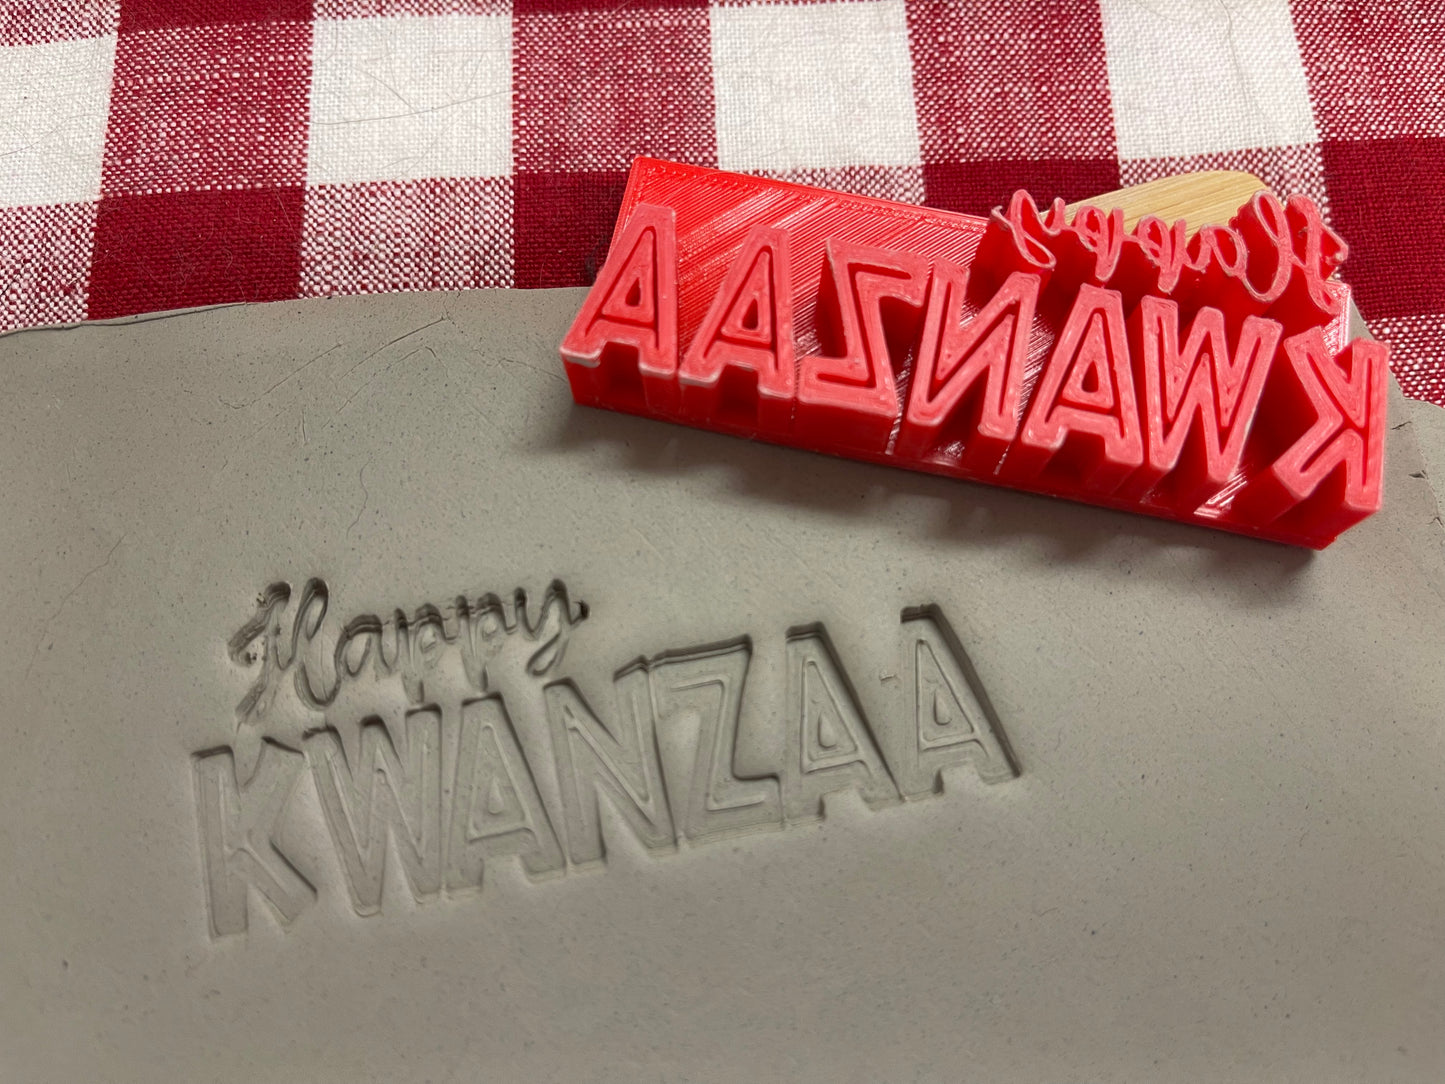 "Happy Kwanzaa" saying pottery stamp - plastic 3D printed, multiple sizes available